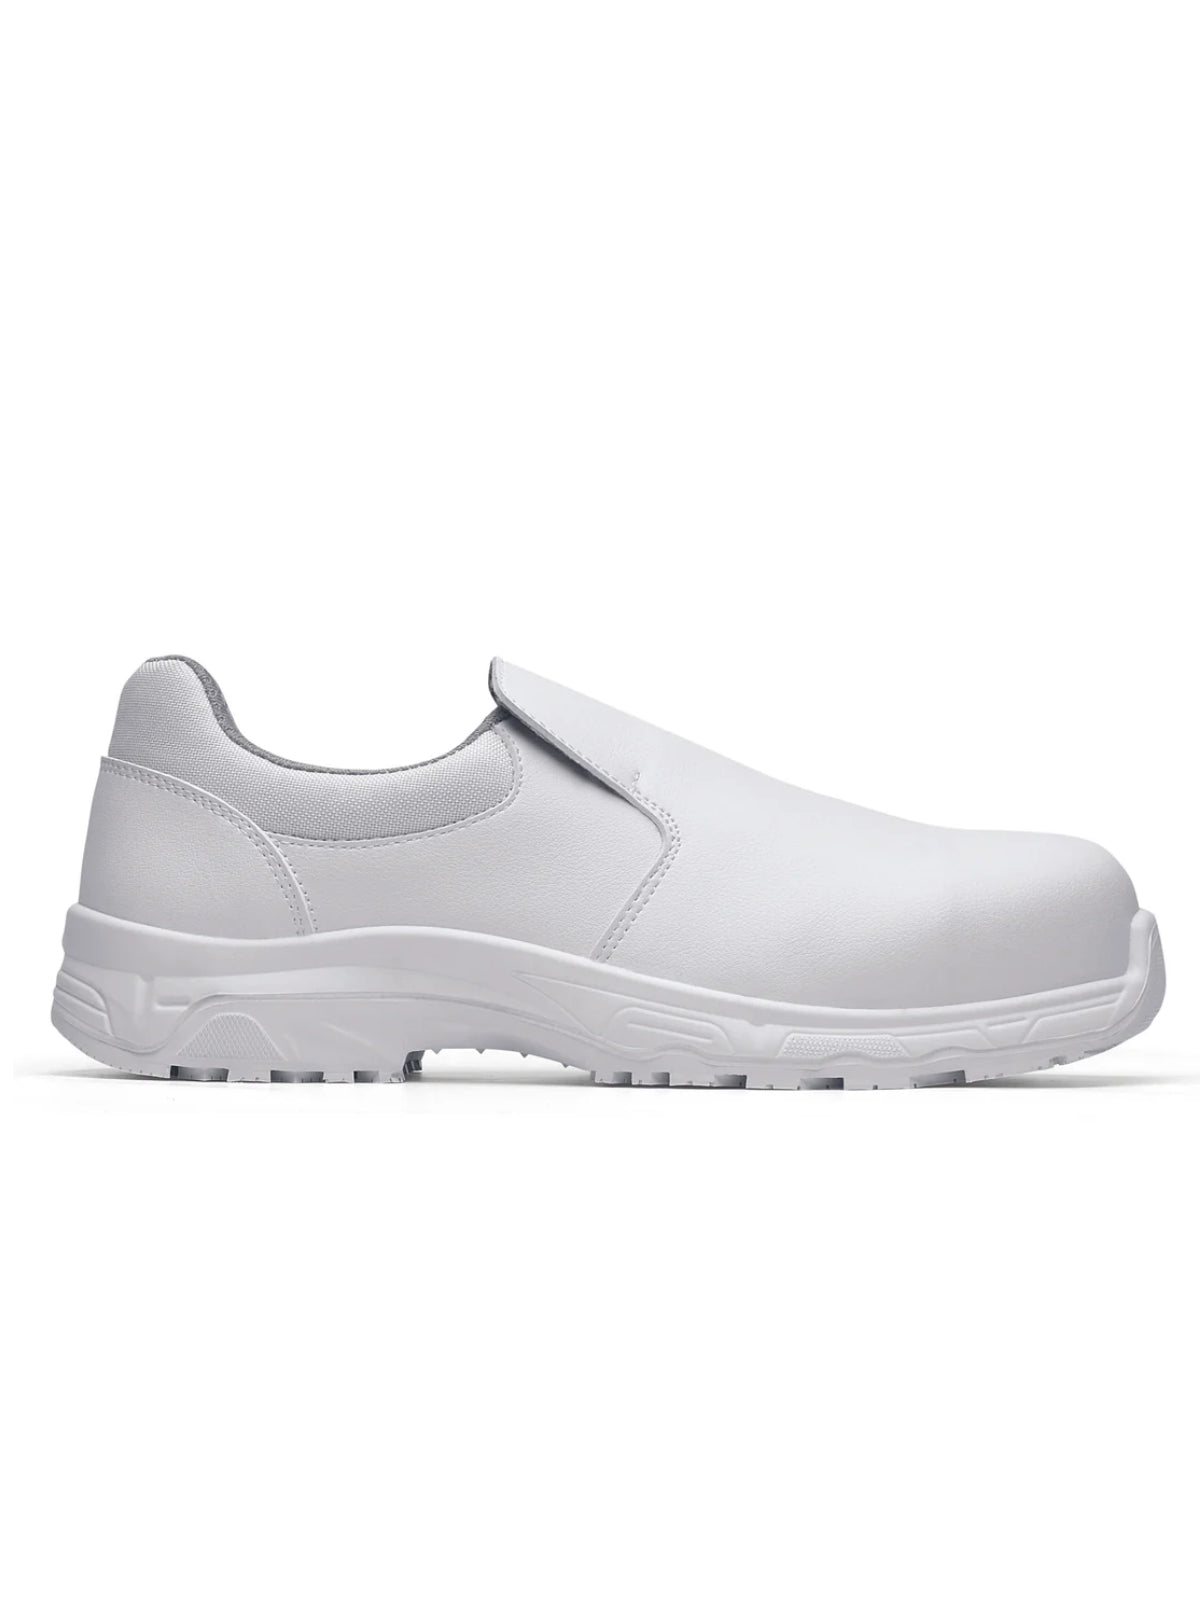 Unisex Safety Shoe Catania White (S3) by Shoes For Crews